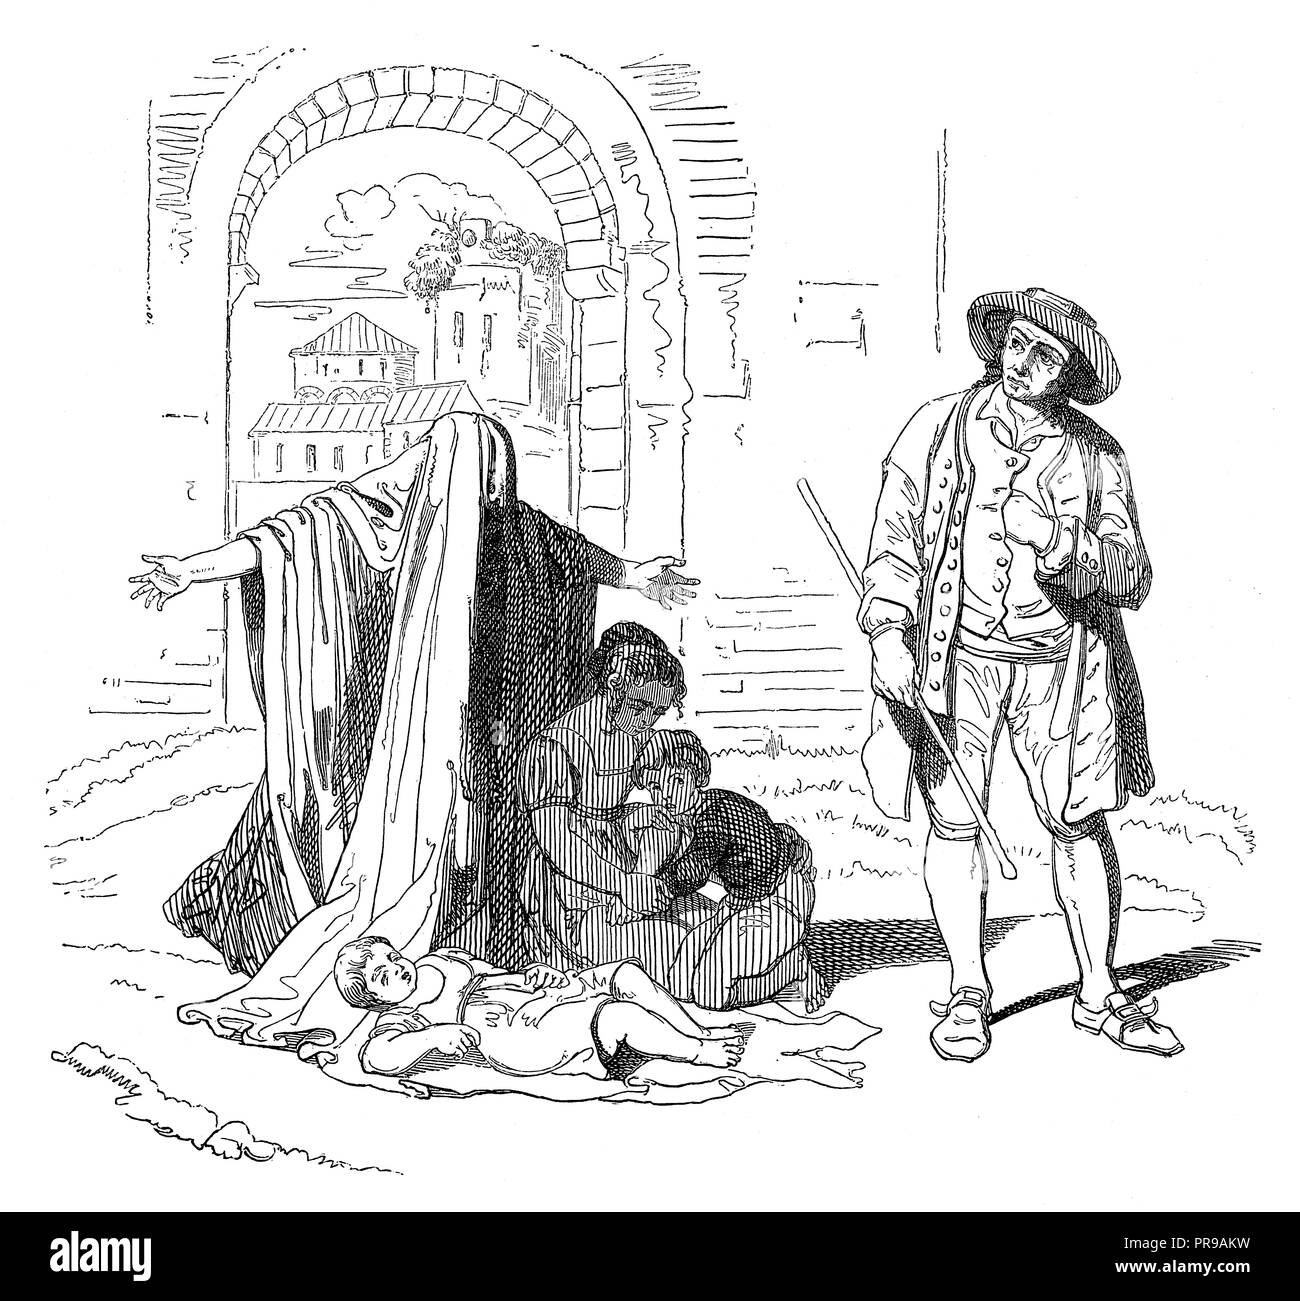 19th century illustration the Beggar by Pinelli. Original artwork published in Le magasin Pittoresque by M. A. Lachevardiere, Paris, 1846. Stock Photo